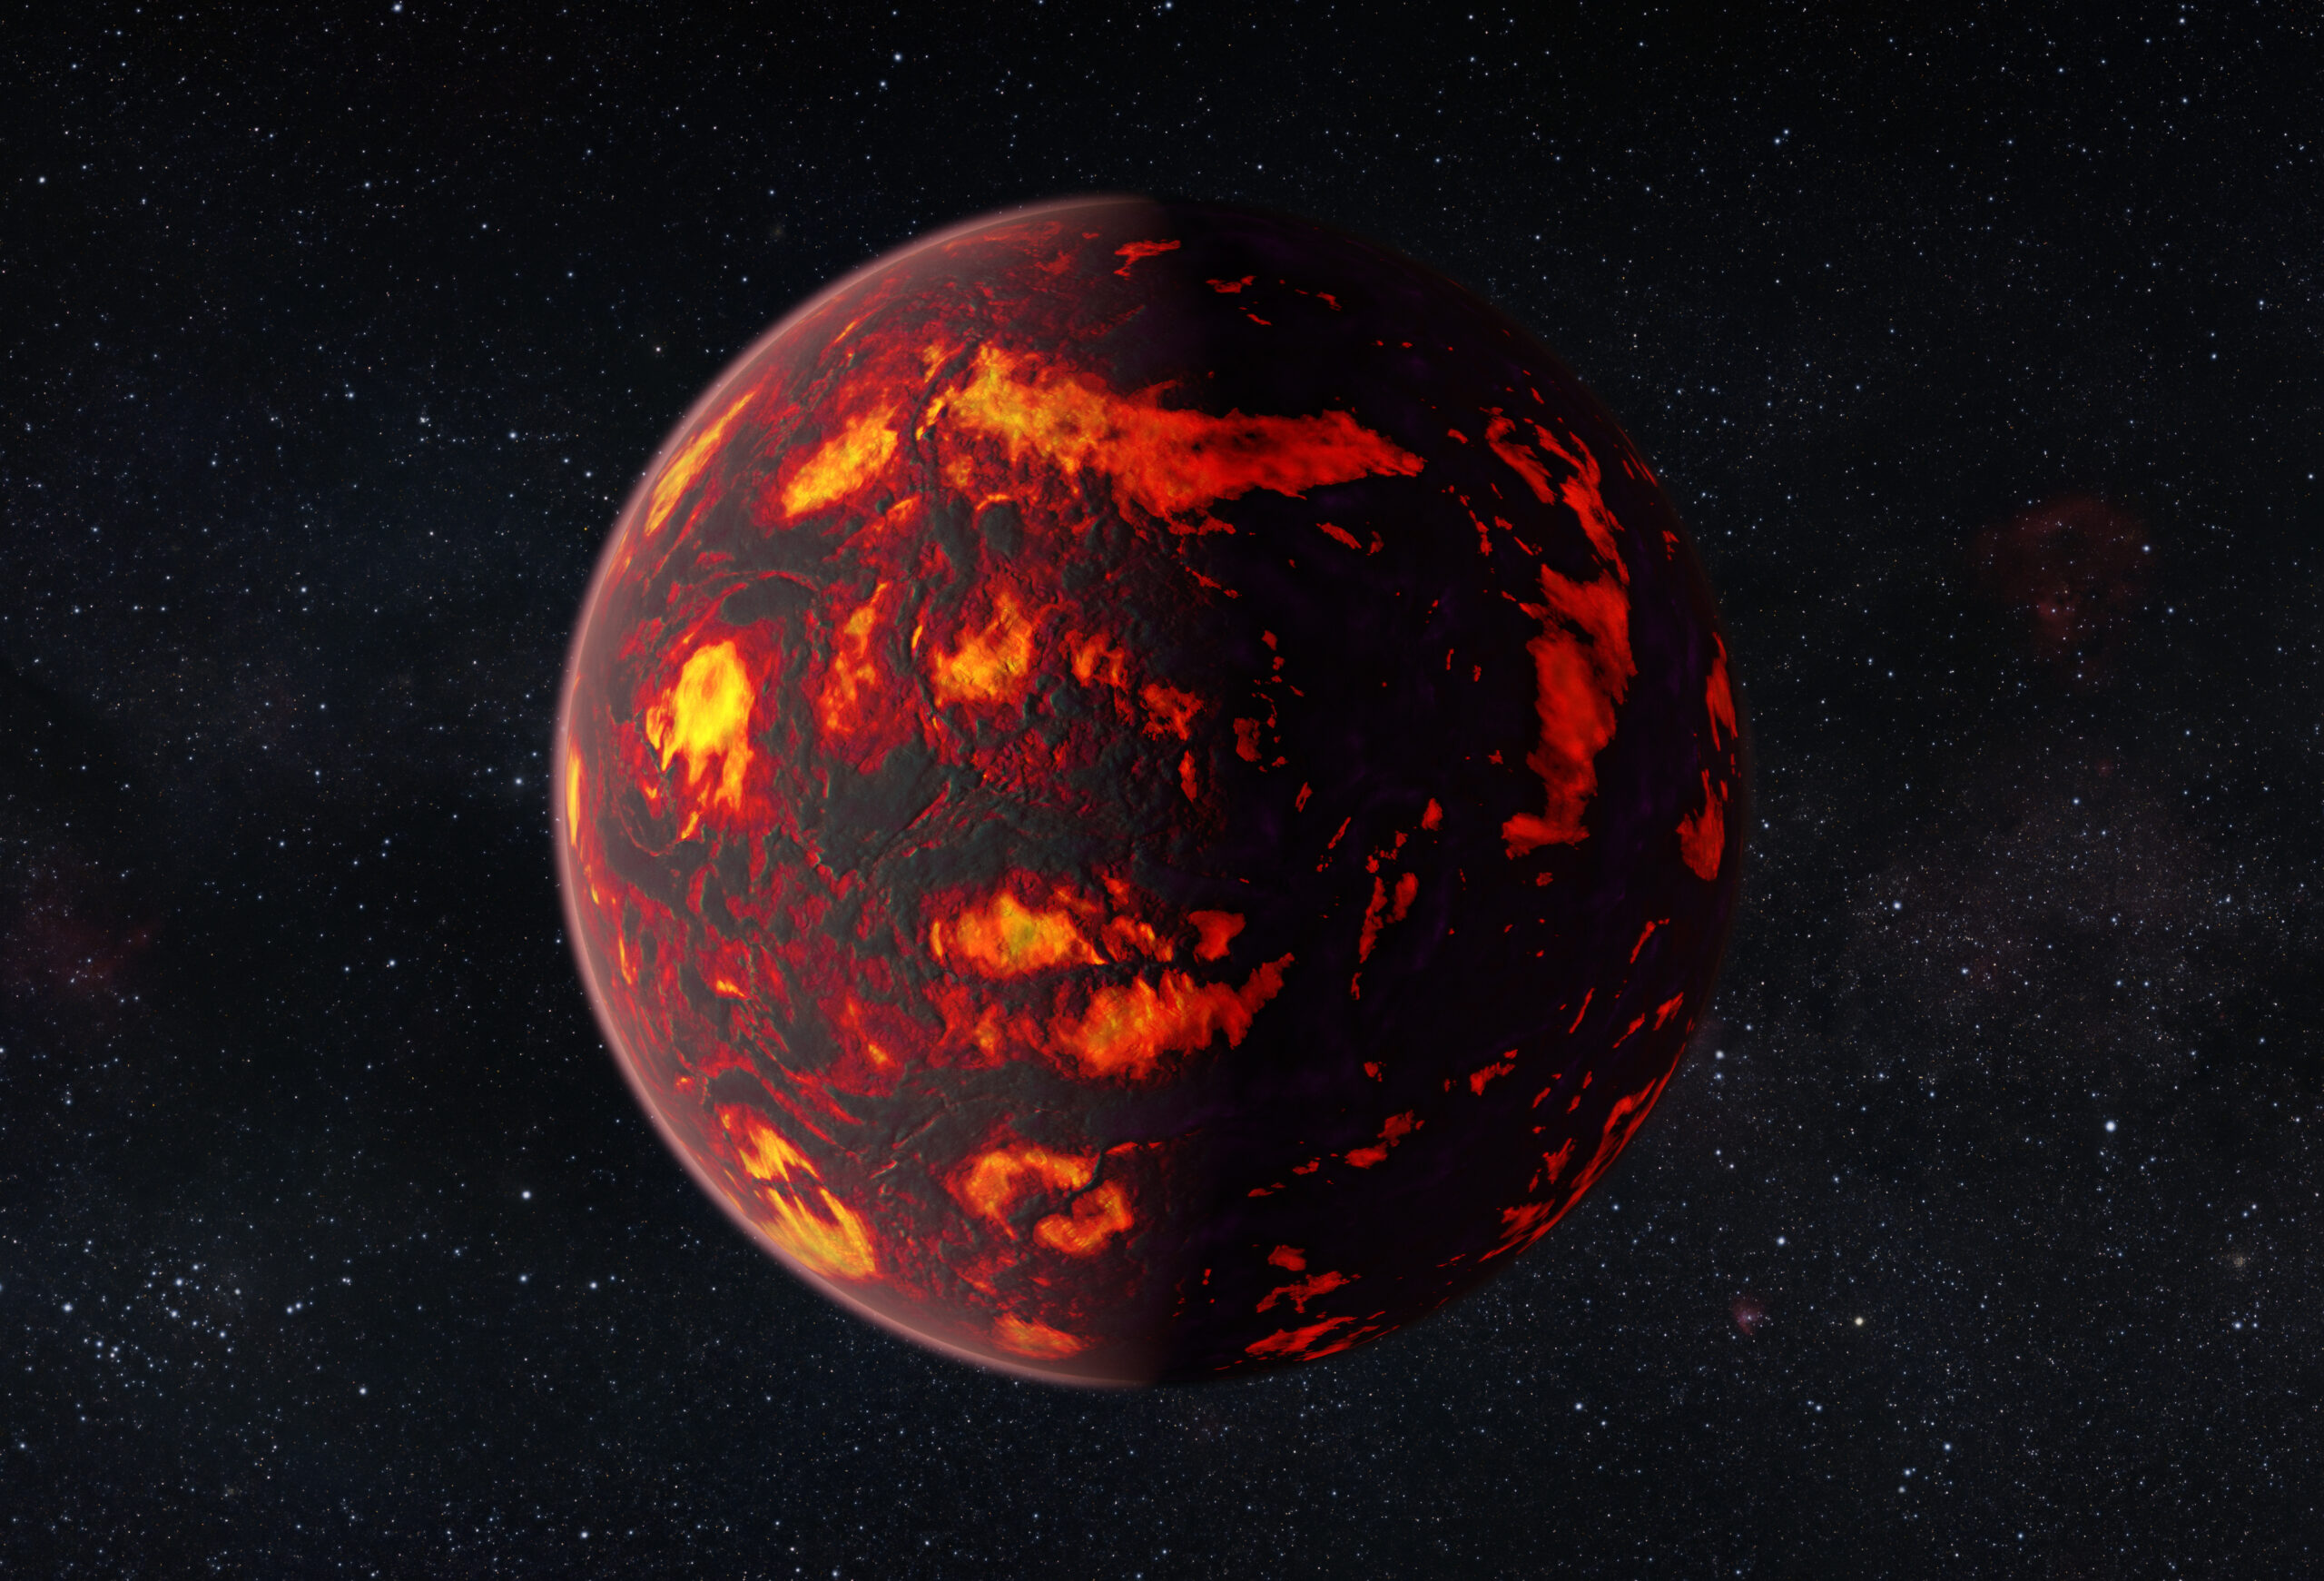 How much iron does a lava planet’s atmosphere contain?